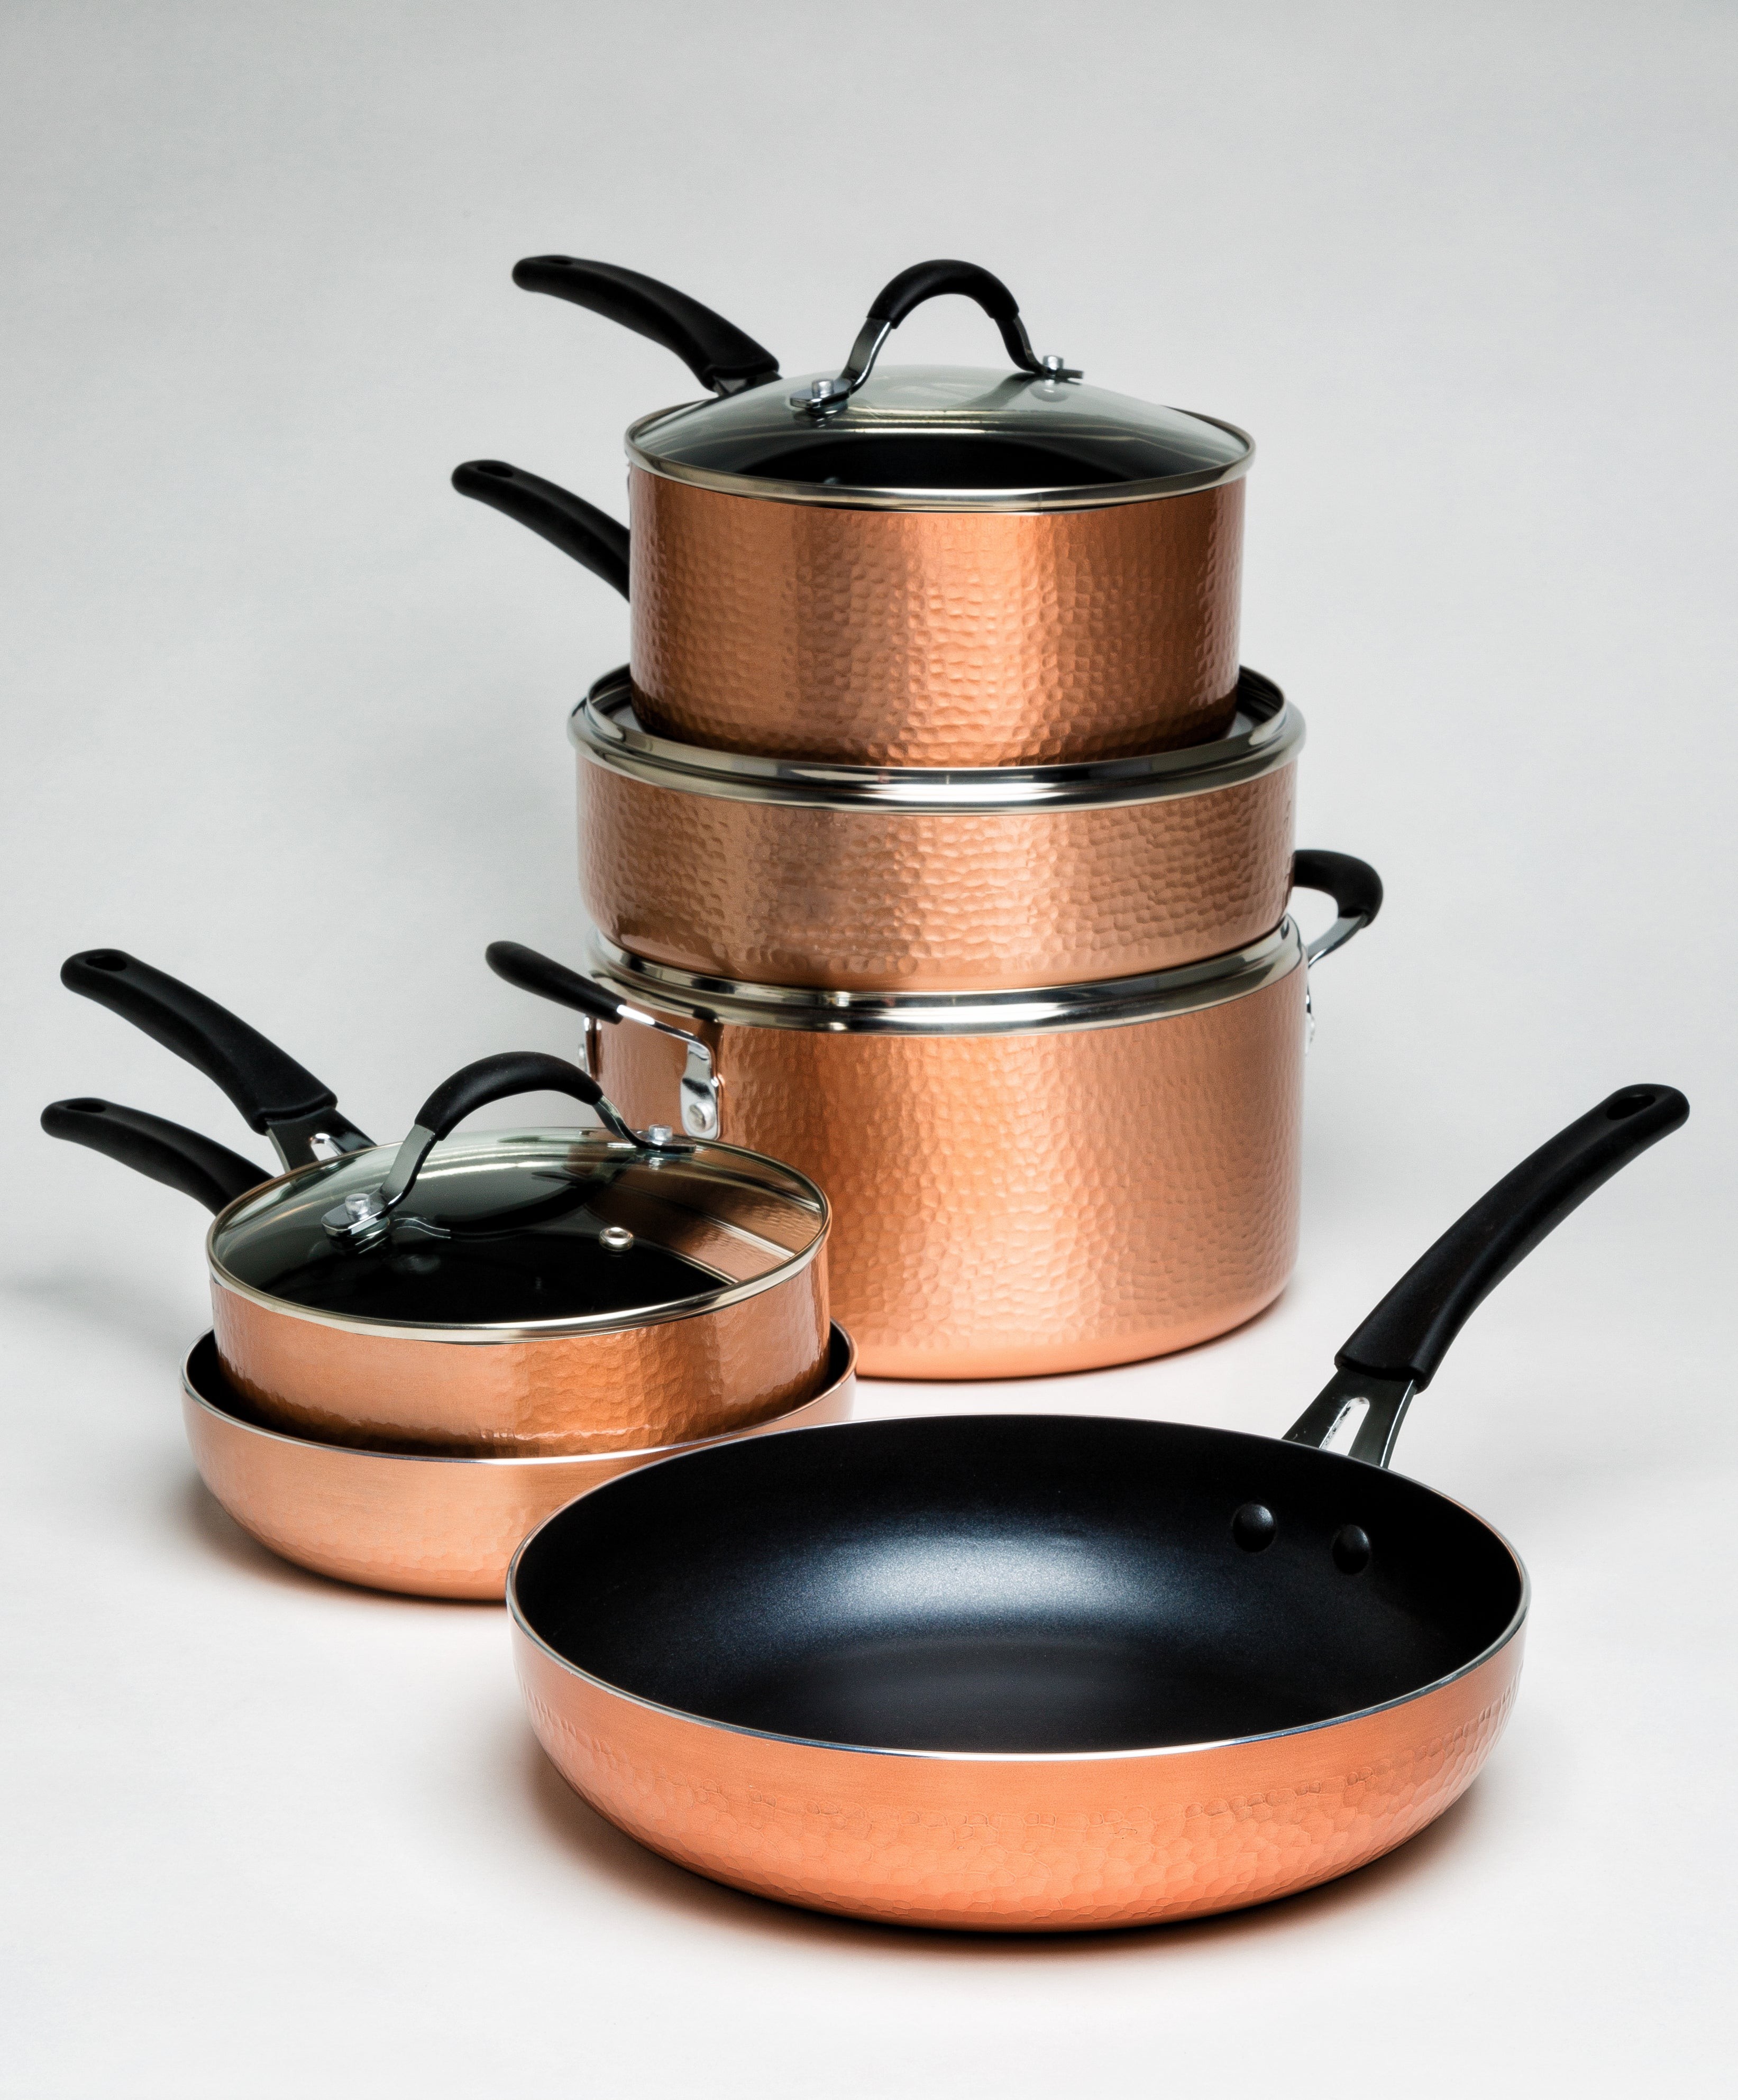 10pc Impressions Nonstick Cookware Hammered Copper